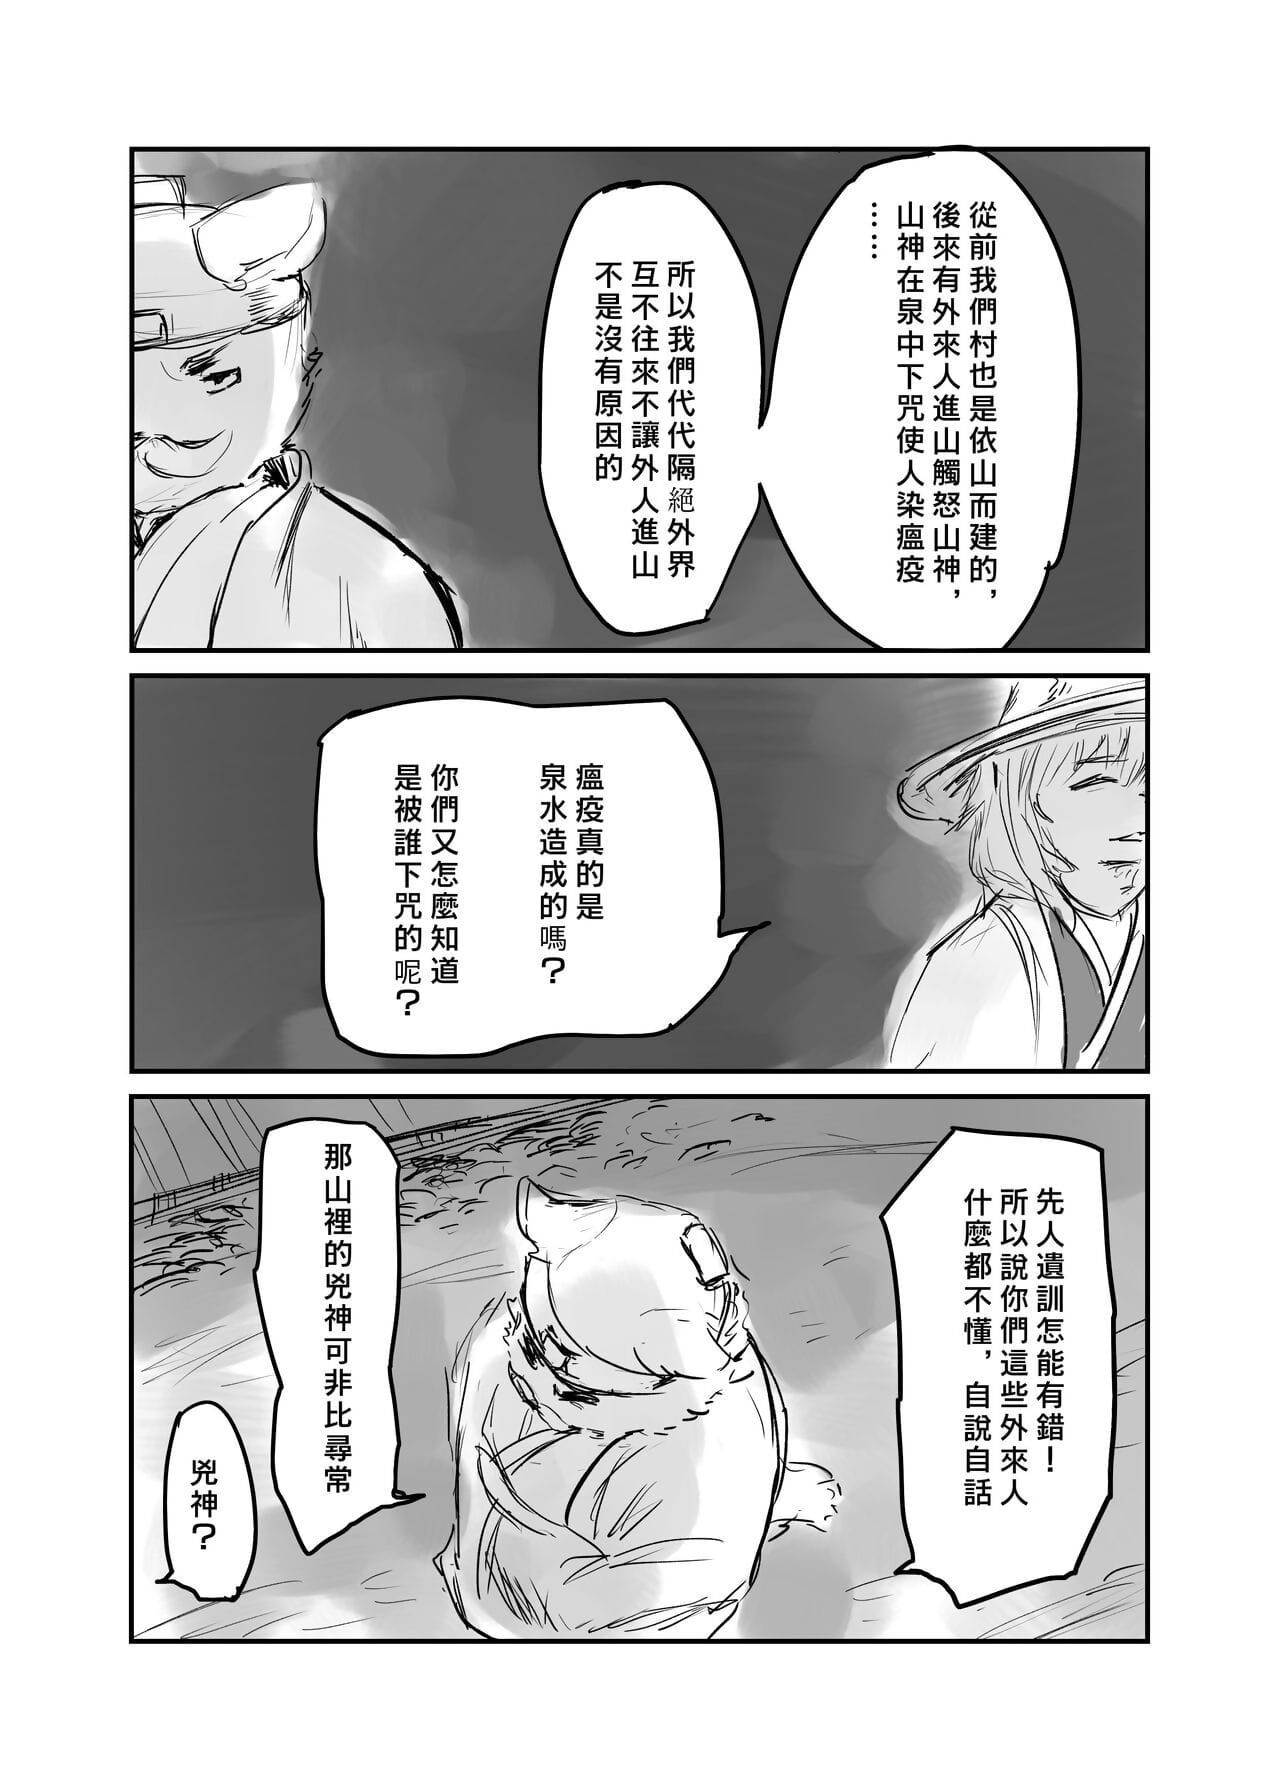 （the زائر 他乡之人 by：鬼流 page 1